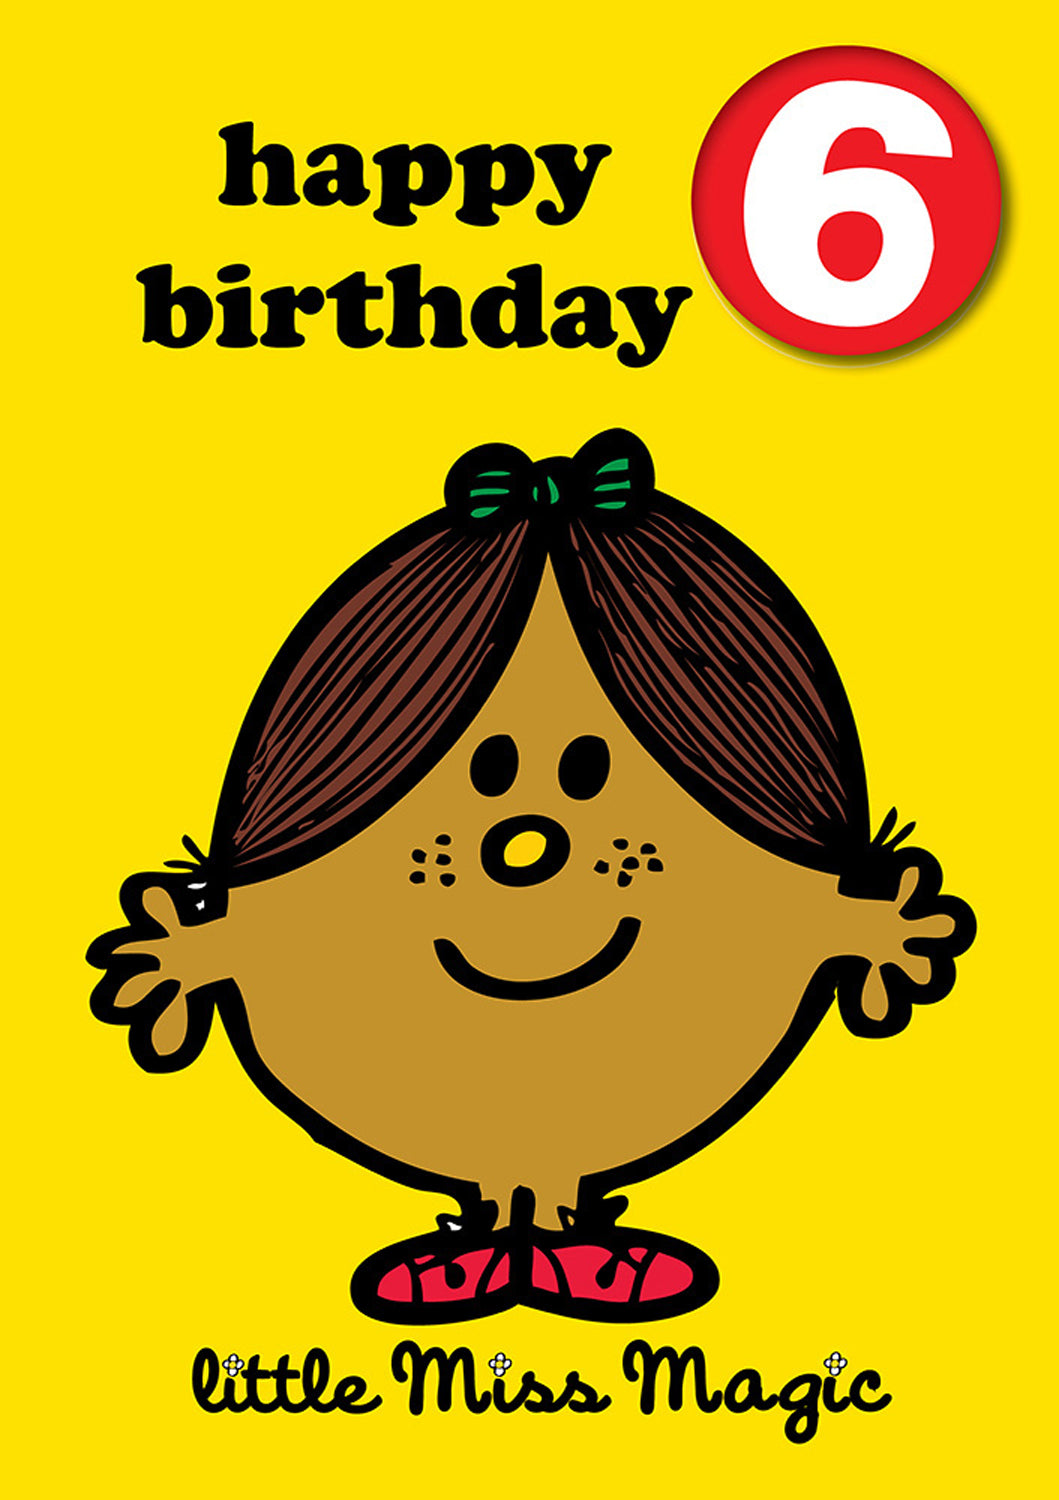 Greeting Card: Mr. Men and Little Miss - Little Miss Magic Age 6 Badge